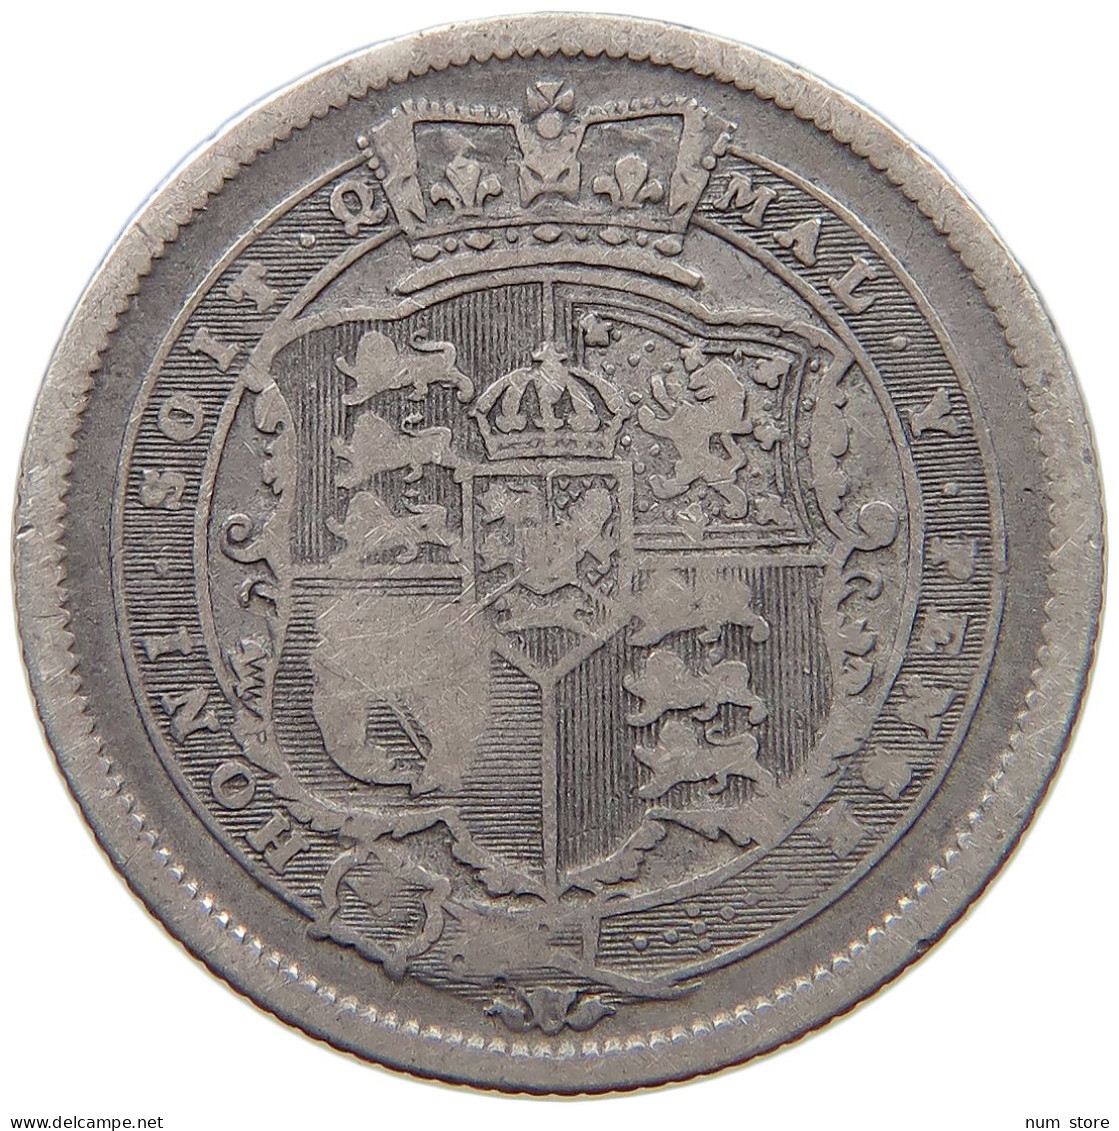 GREAT BRITAIN SHILLING 1816 GEORGE III. 1760-1820 #c049 0343 - H. 1 Shilling